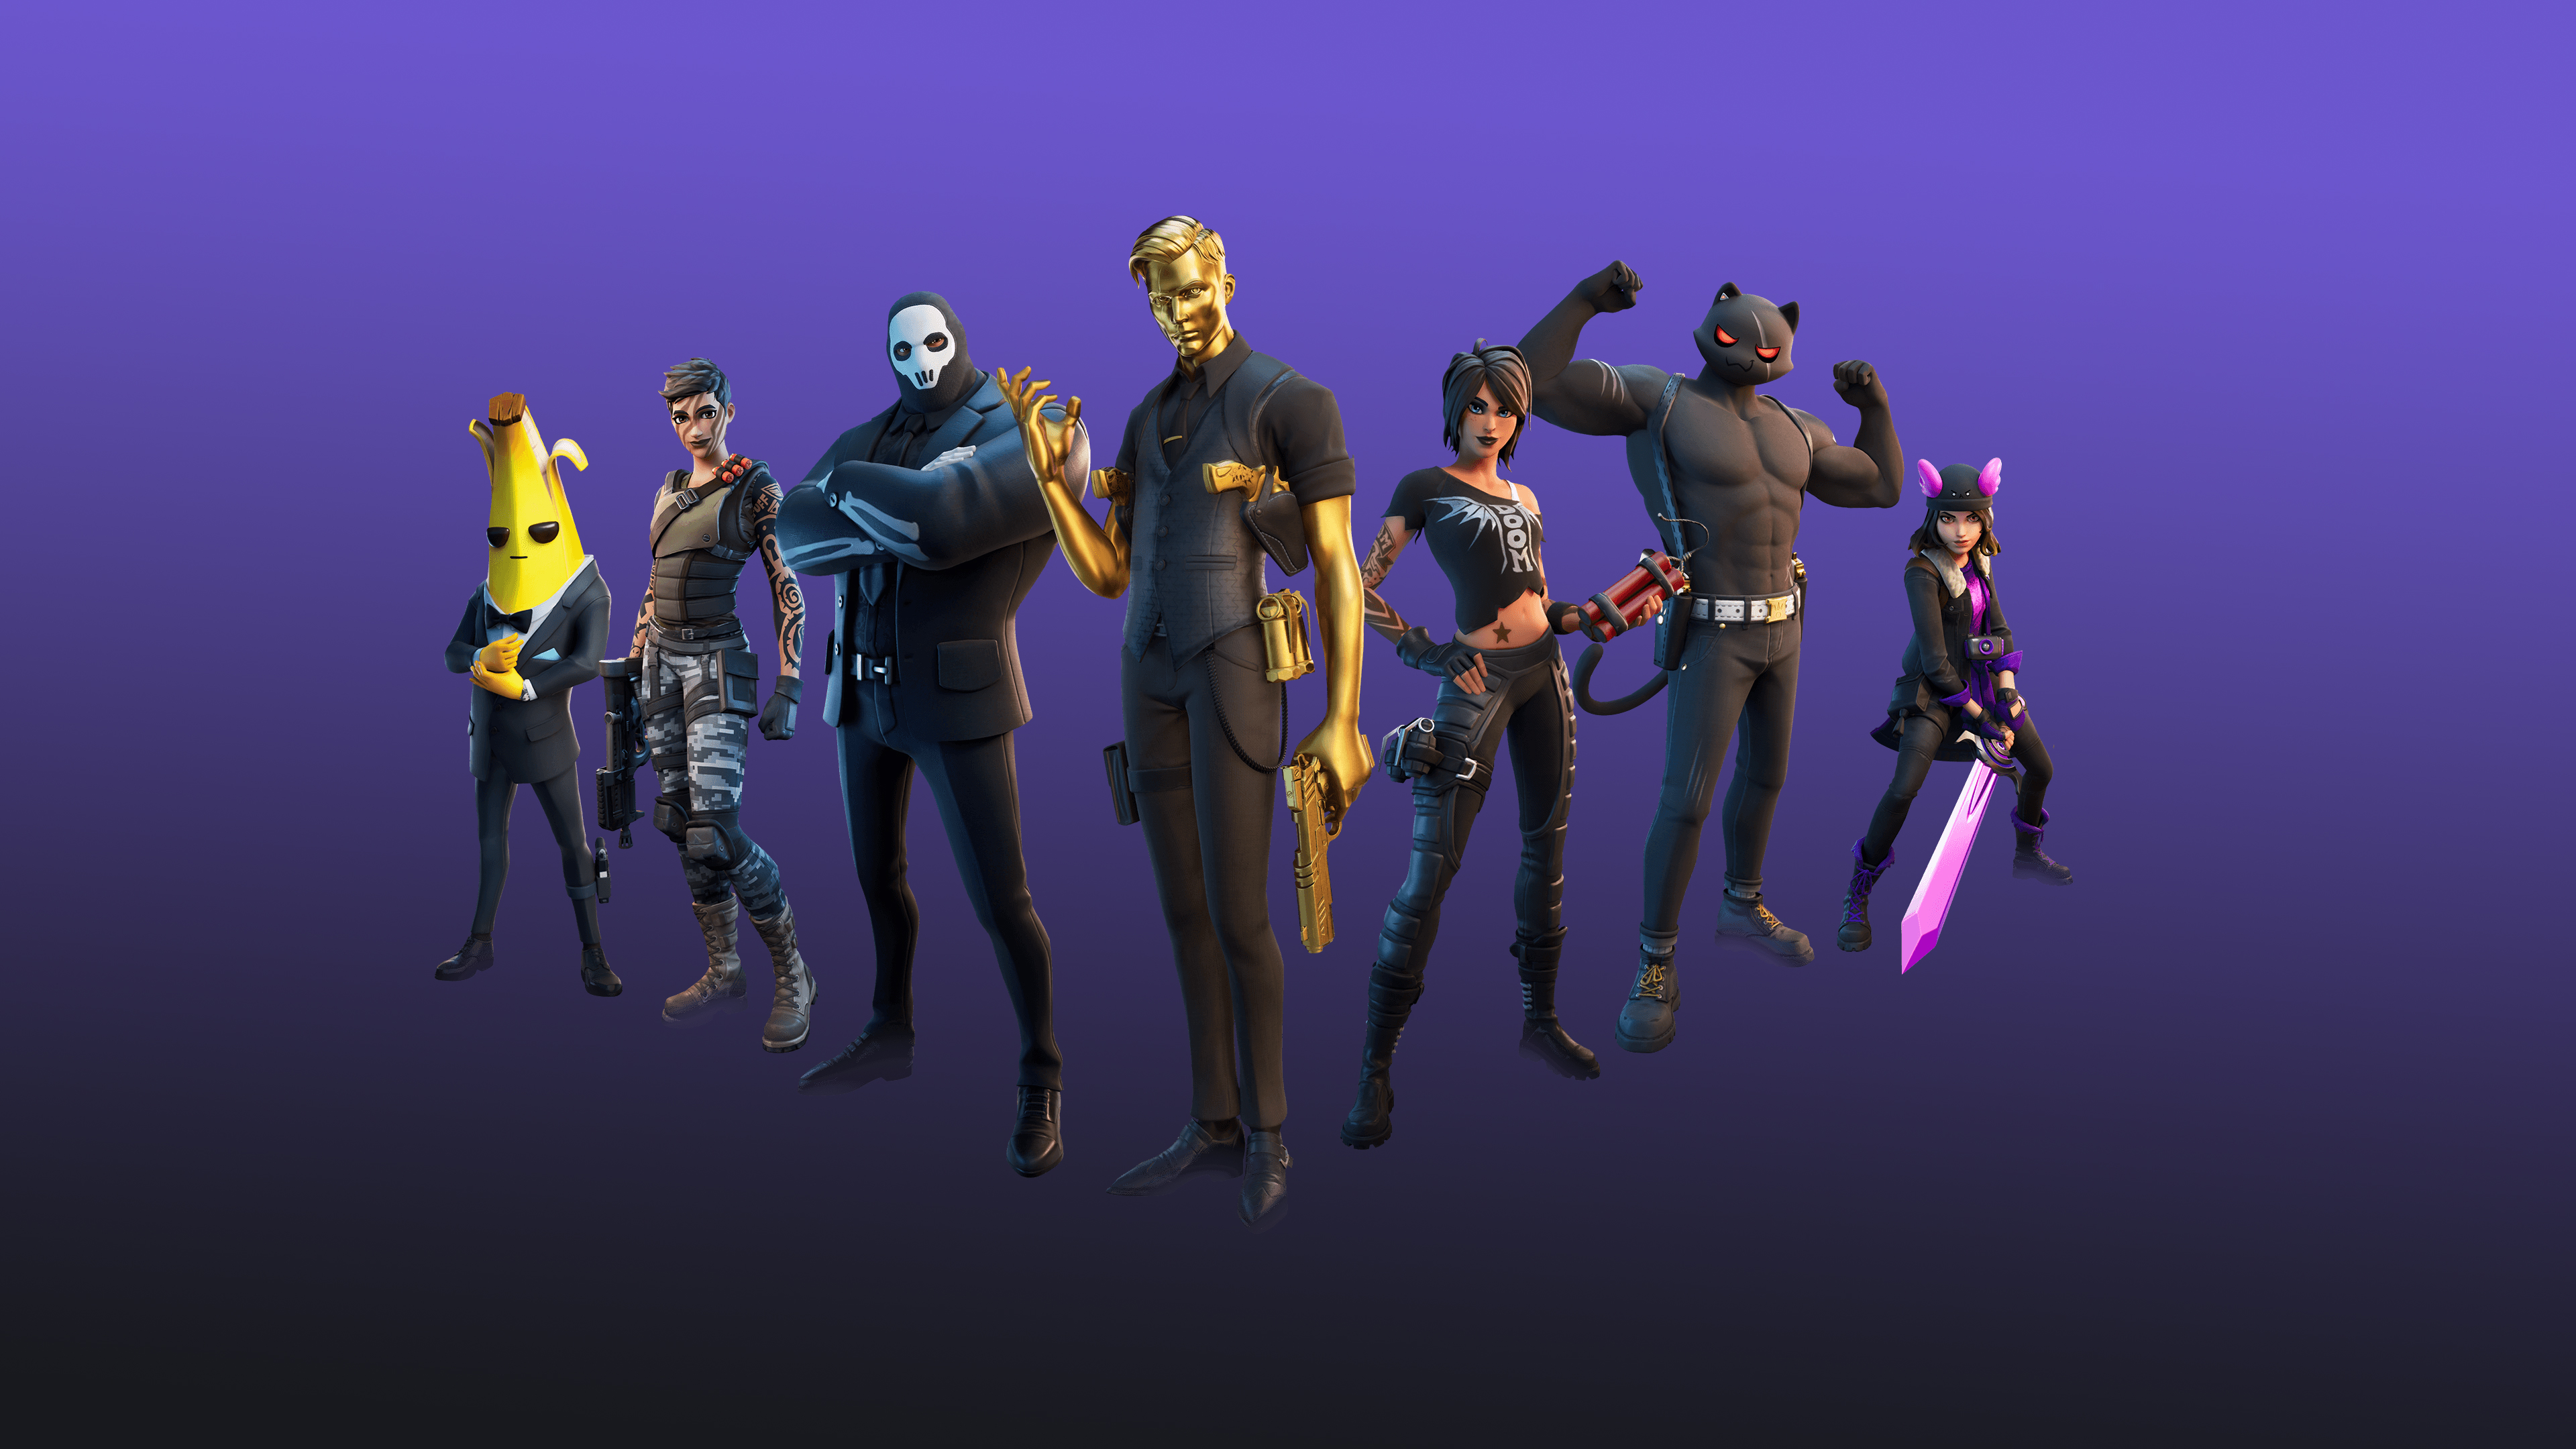 128x128 Fortnite Battle Royale Chapter 2 Season 2 128x128 Resolution Wallpaper Hd Games 4k Wallpapers Images Photos And Background